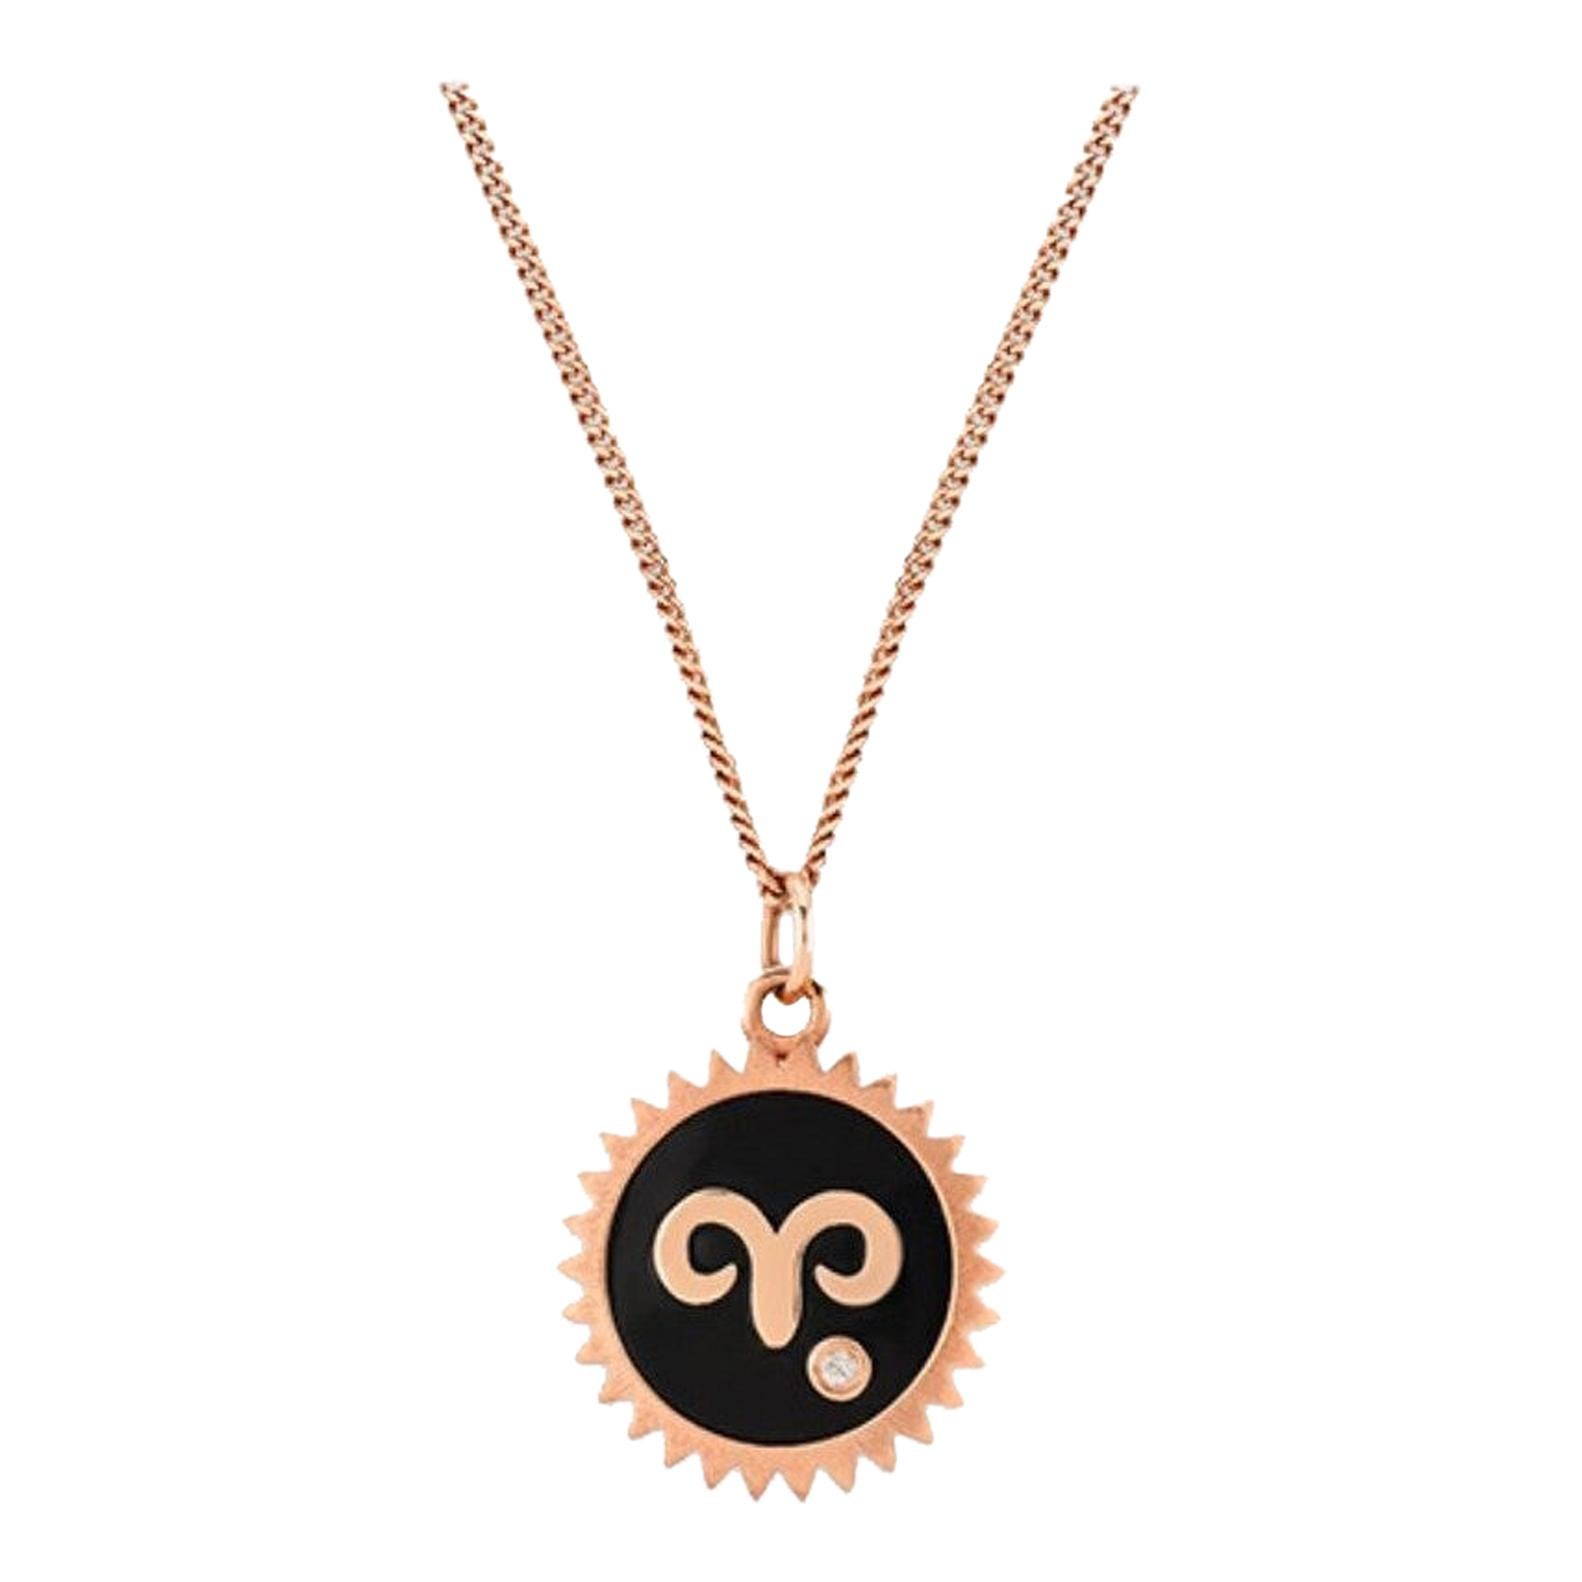 Aries Necklace with Black Enamel & White Diamond in 14 Karat Rose Gold For Sale